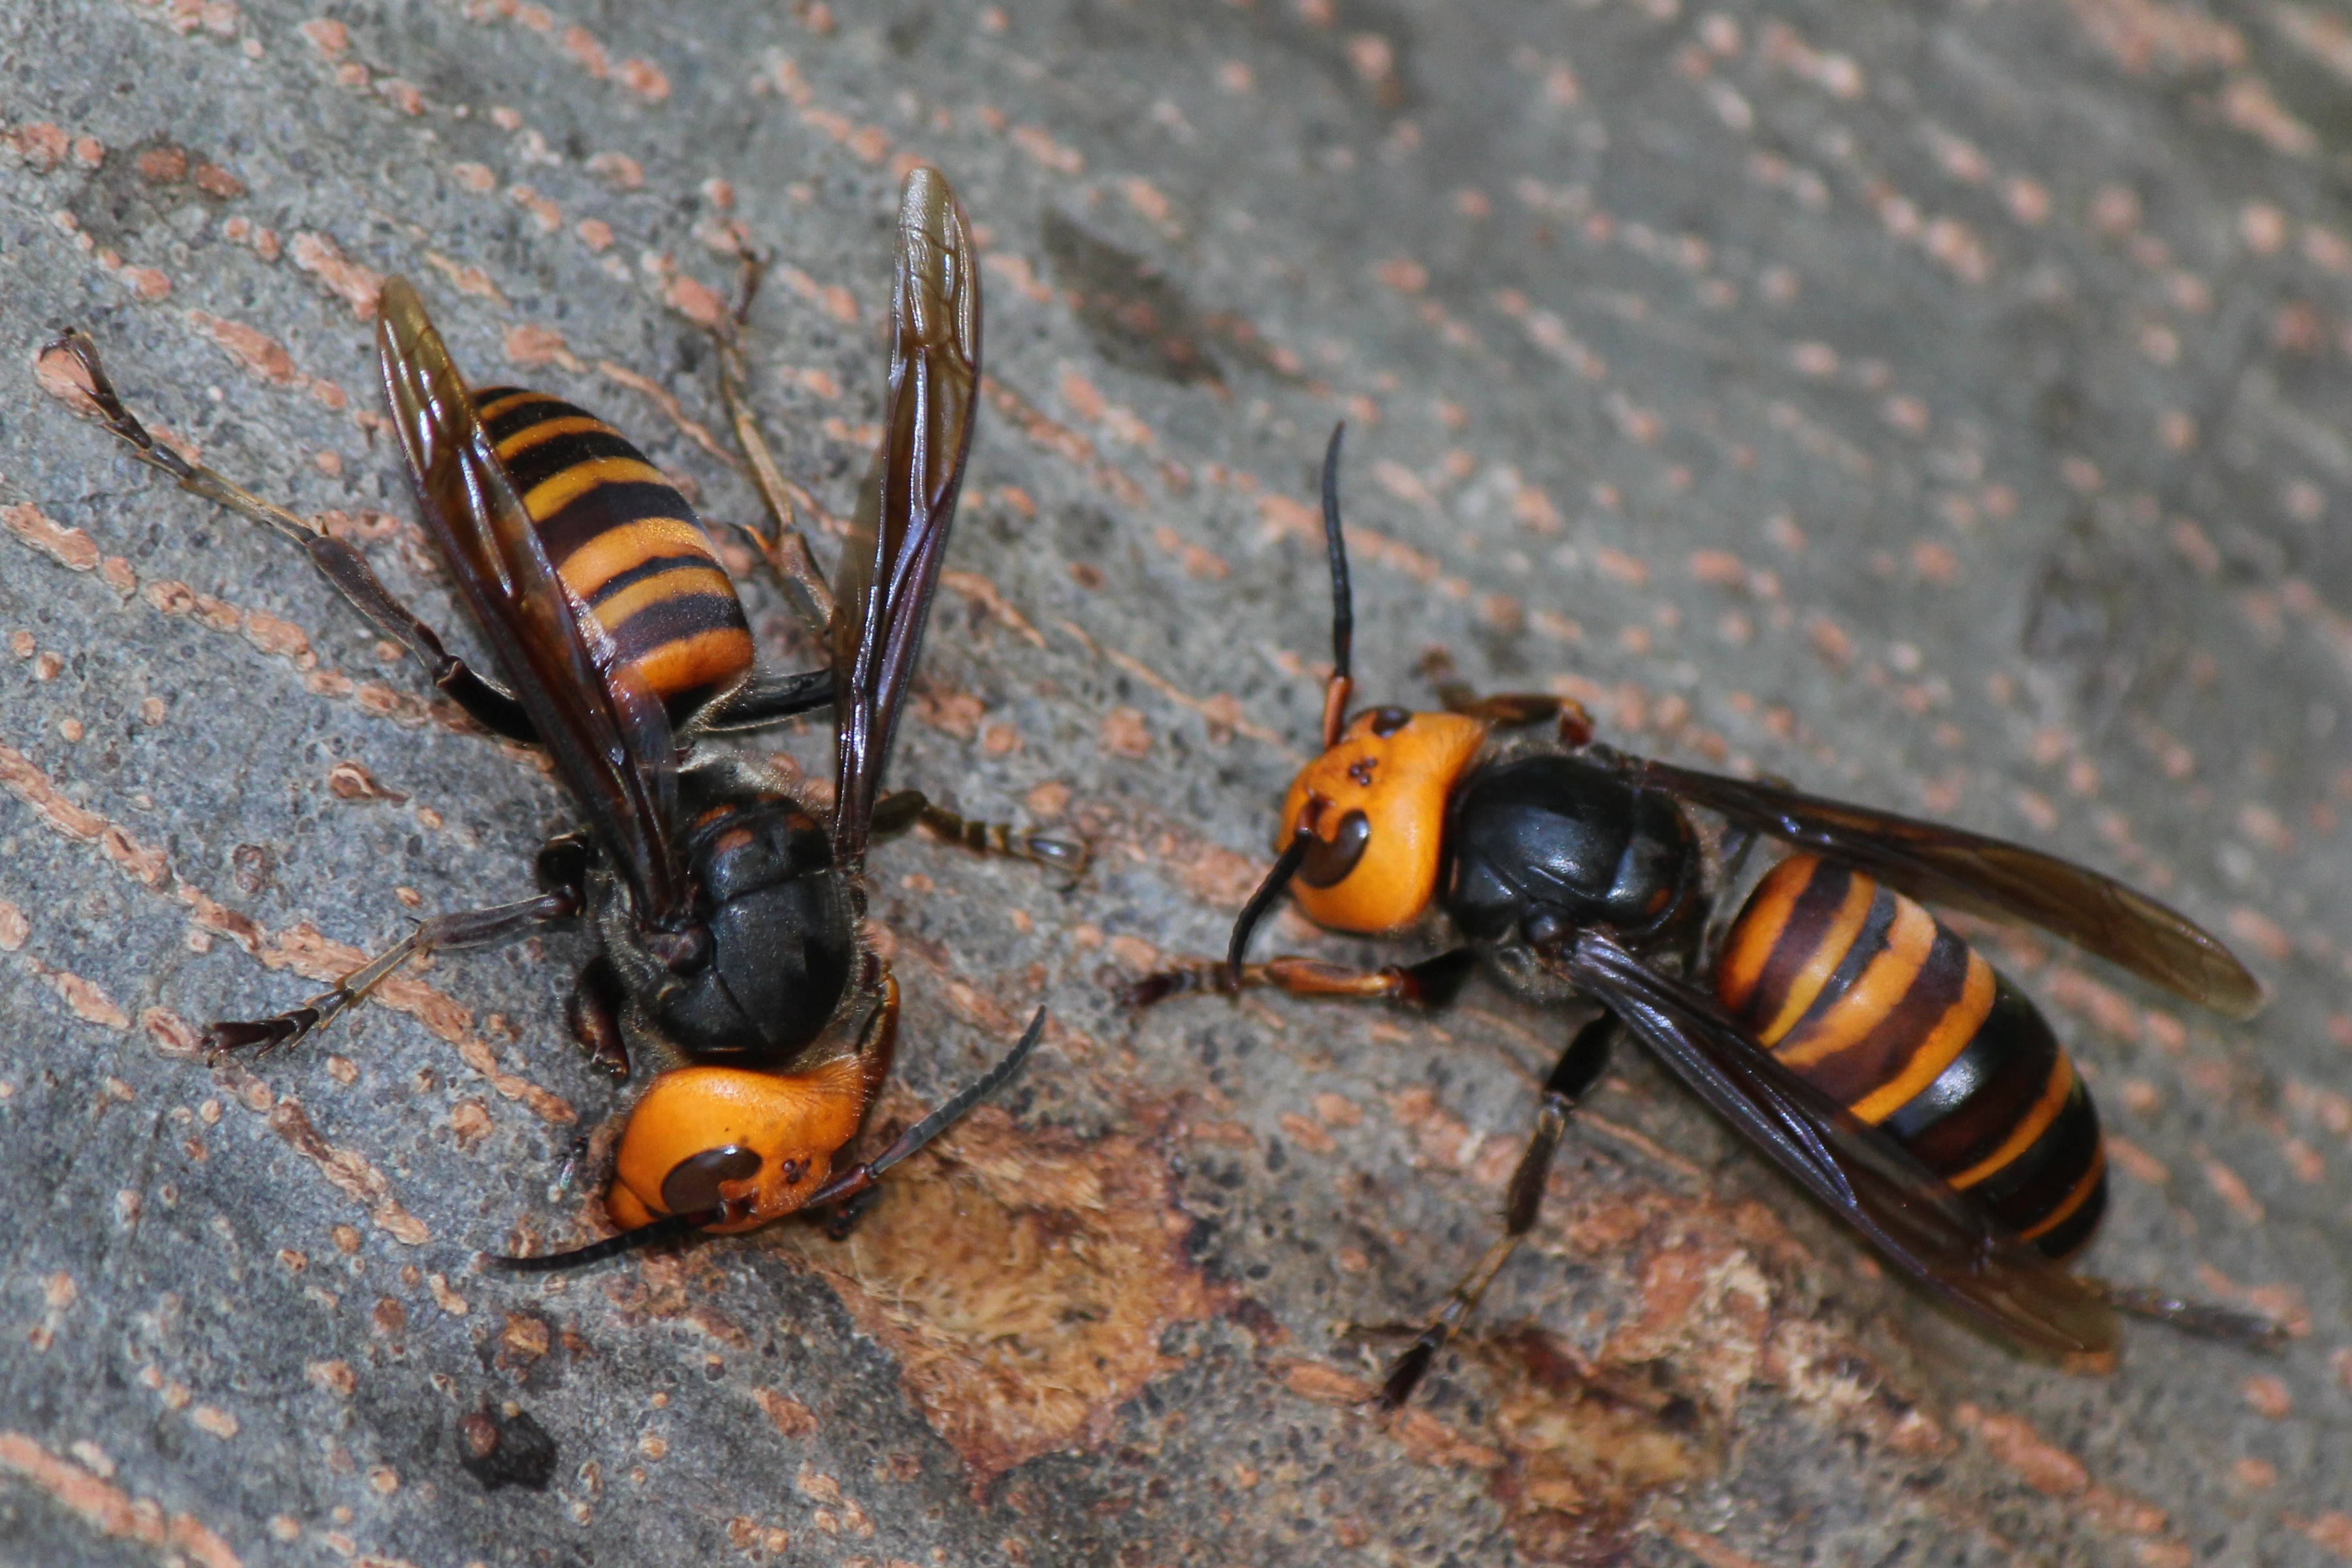 With orange and black stripes on its body and a bright orange face, the giant hornet is a formidable-looking wasp.